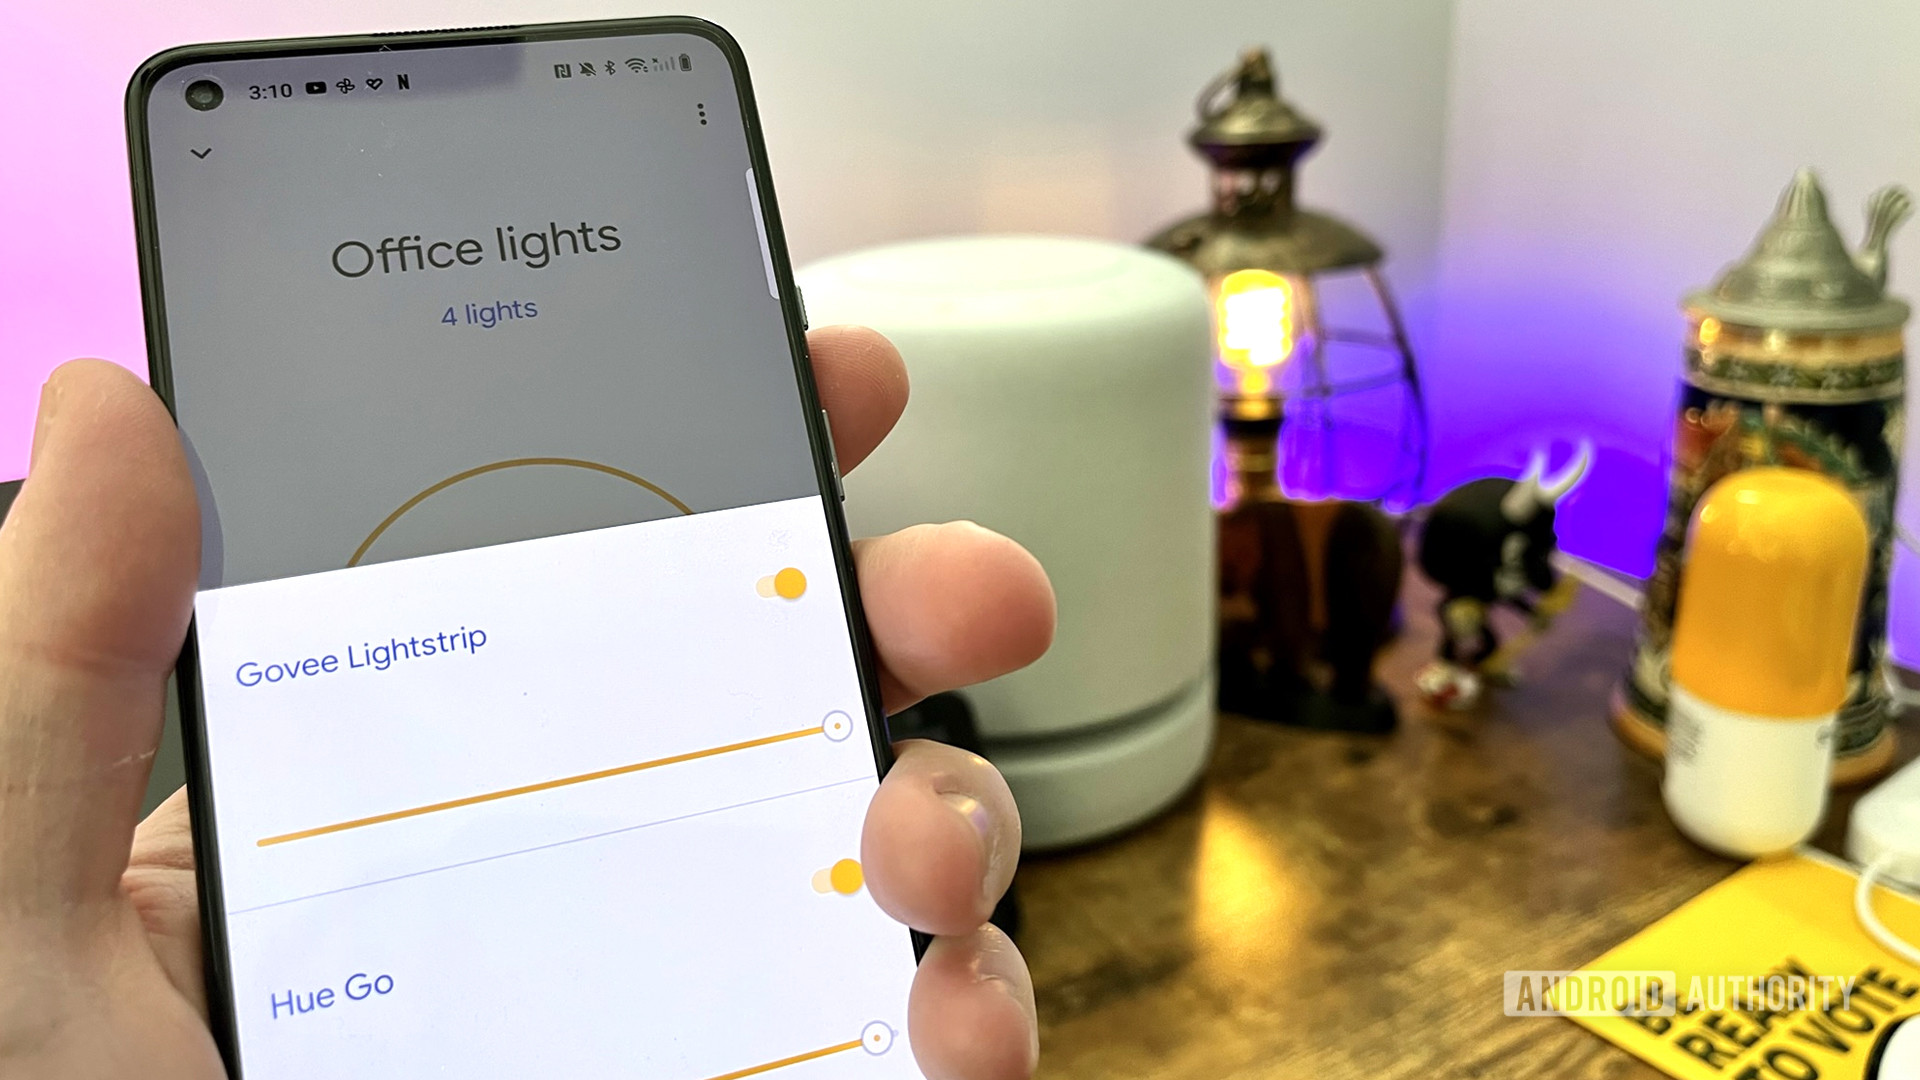 Controlling the Govee Lightstrip in Google Home